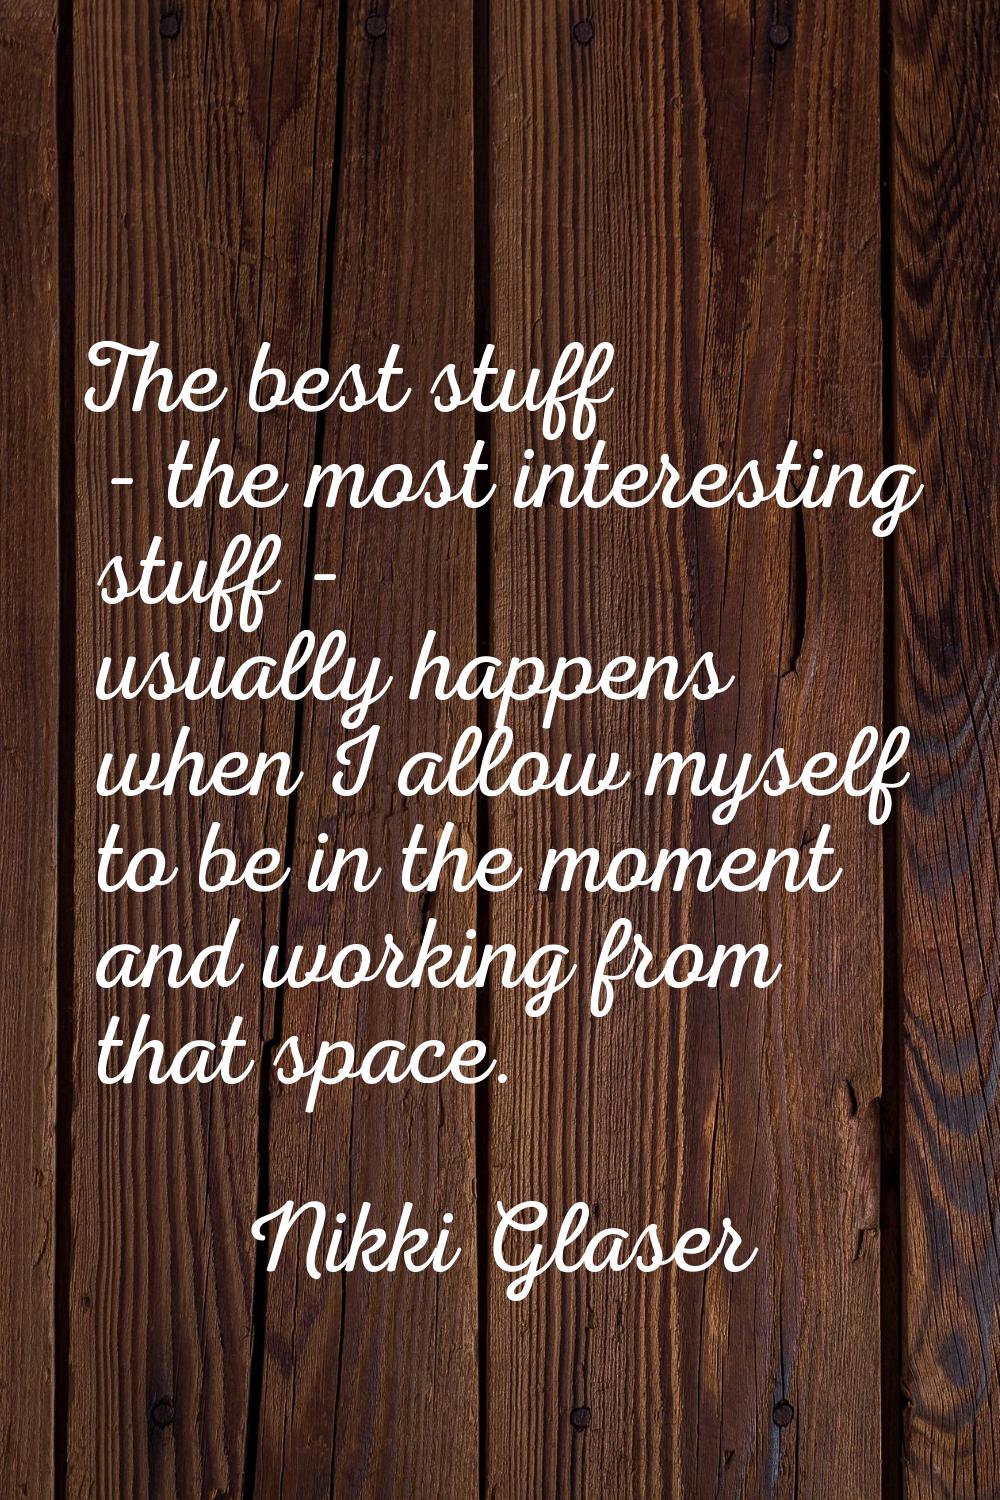 The best stuff - the most interesting stuff - usually happens when I allow myself to be in the mome